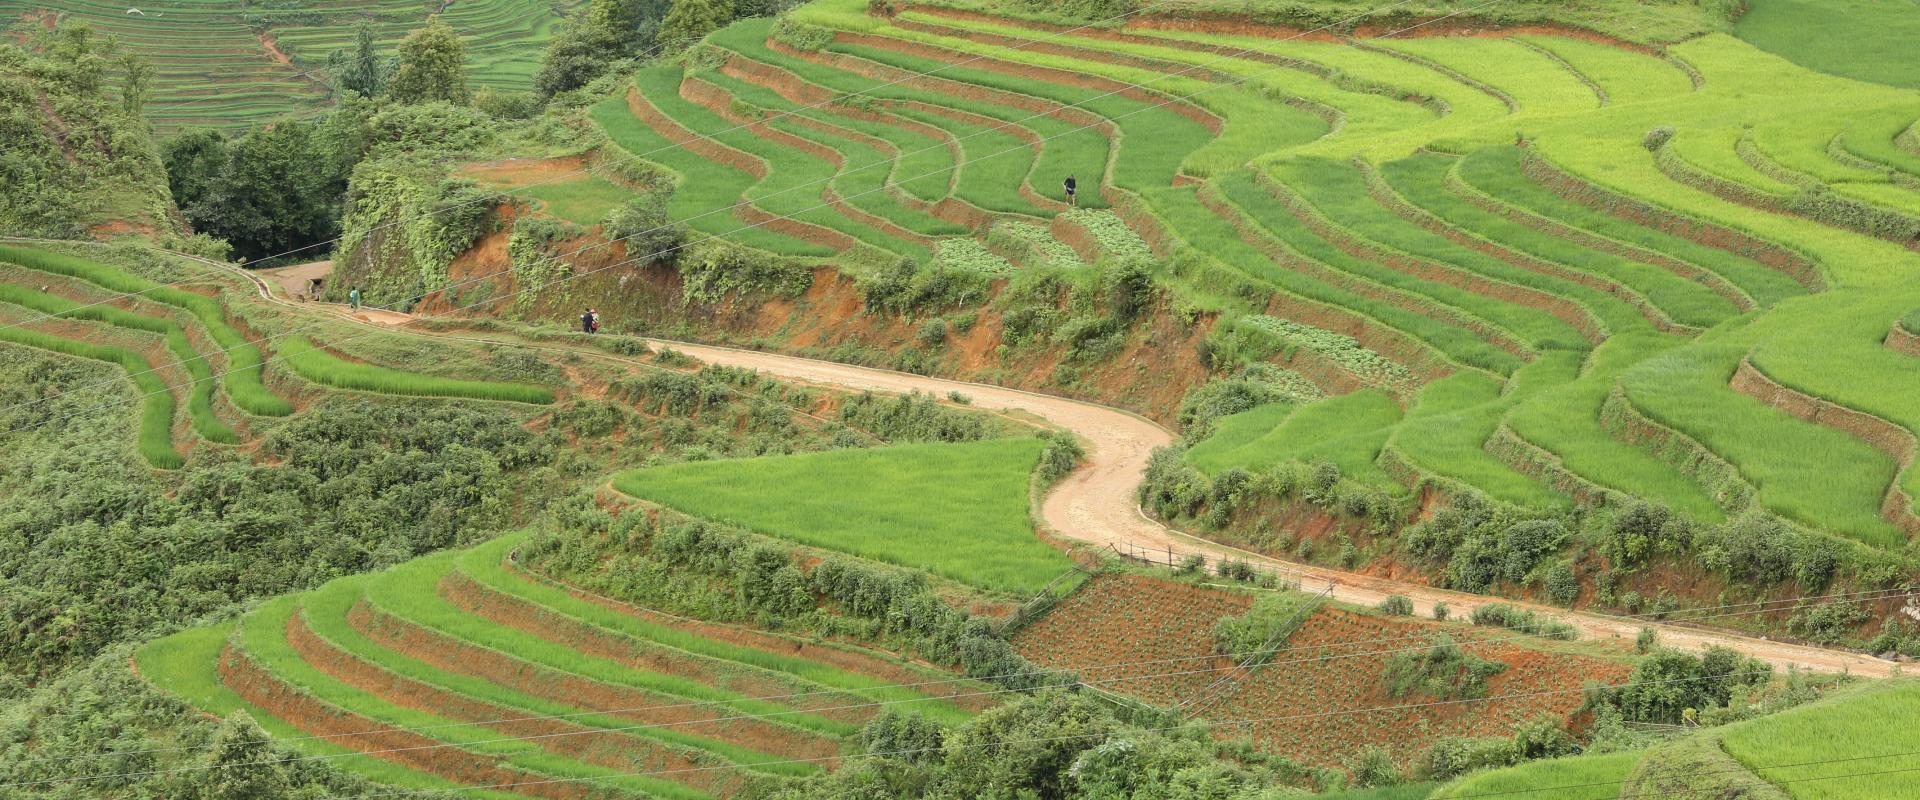 A scenic view of rice production in the Vietnam Highlands